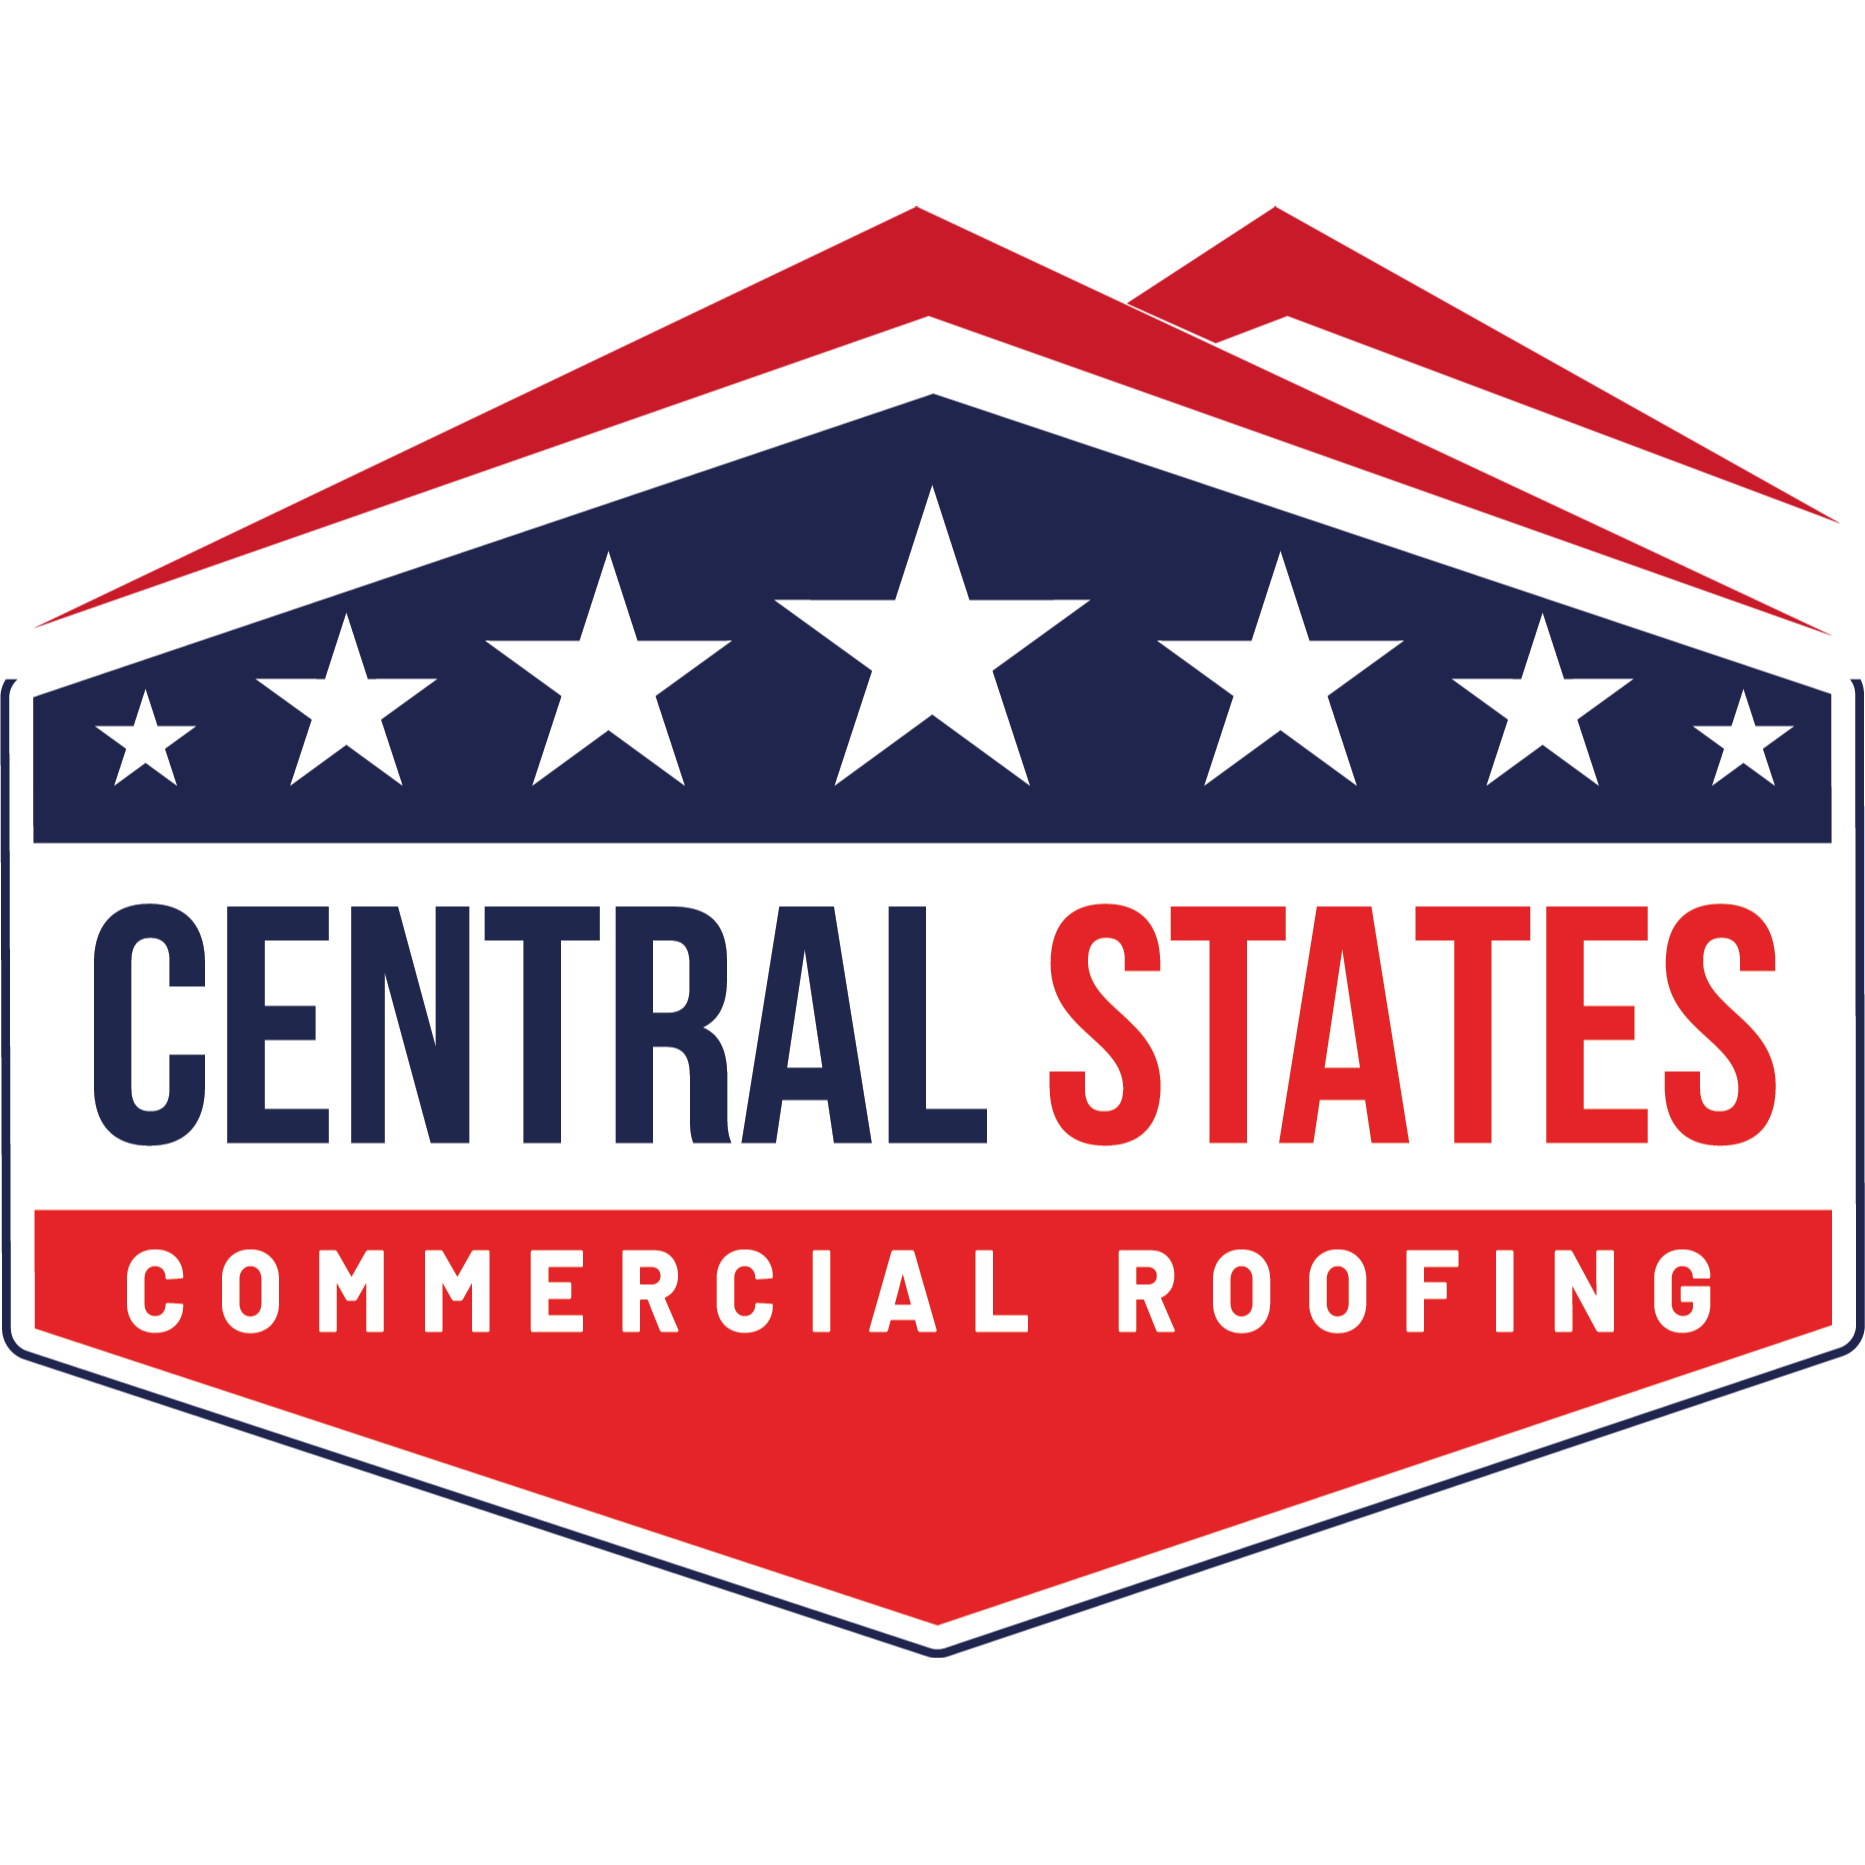 Central States Commercial Roofing - Meadville, PA 16335 - (814)694-5171 | ShowMeLocal.com